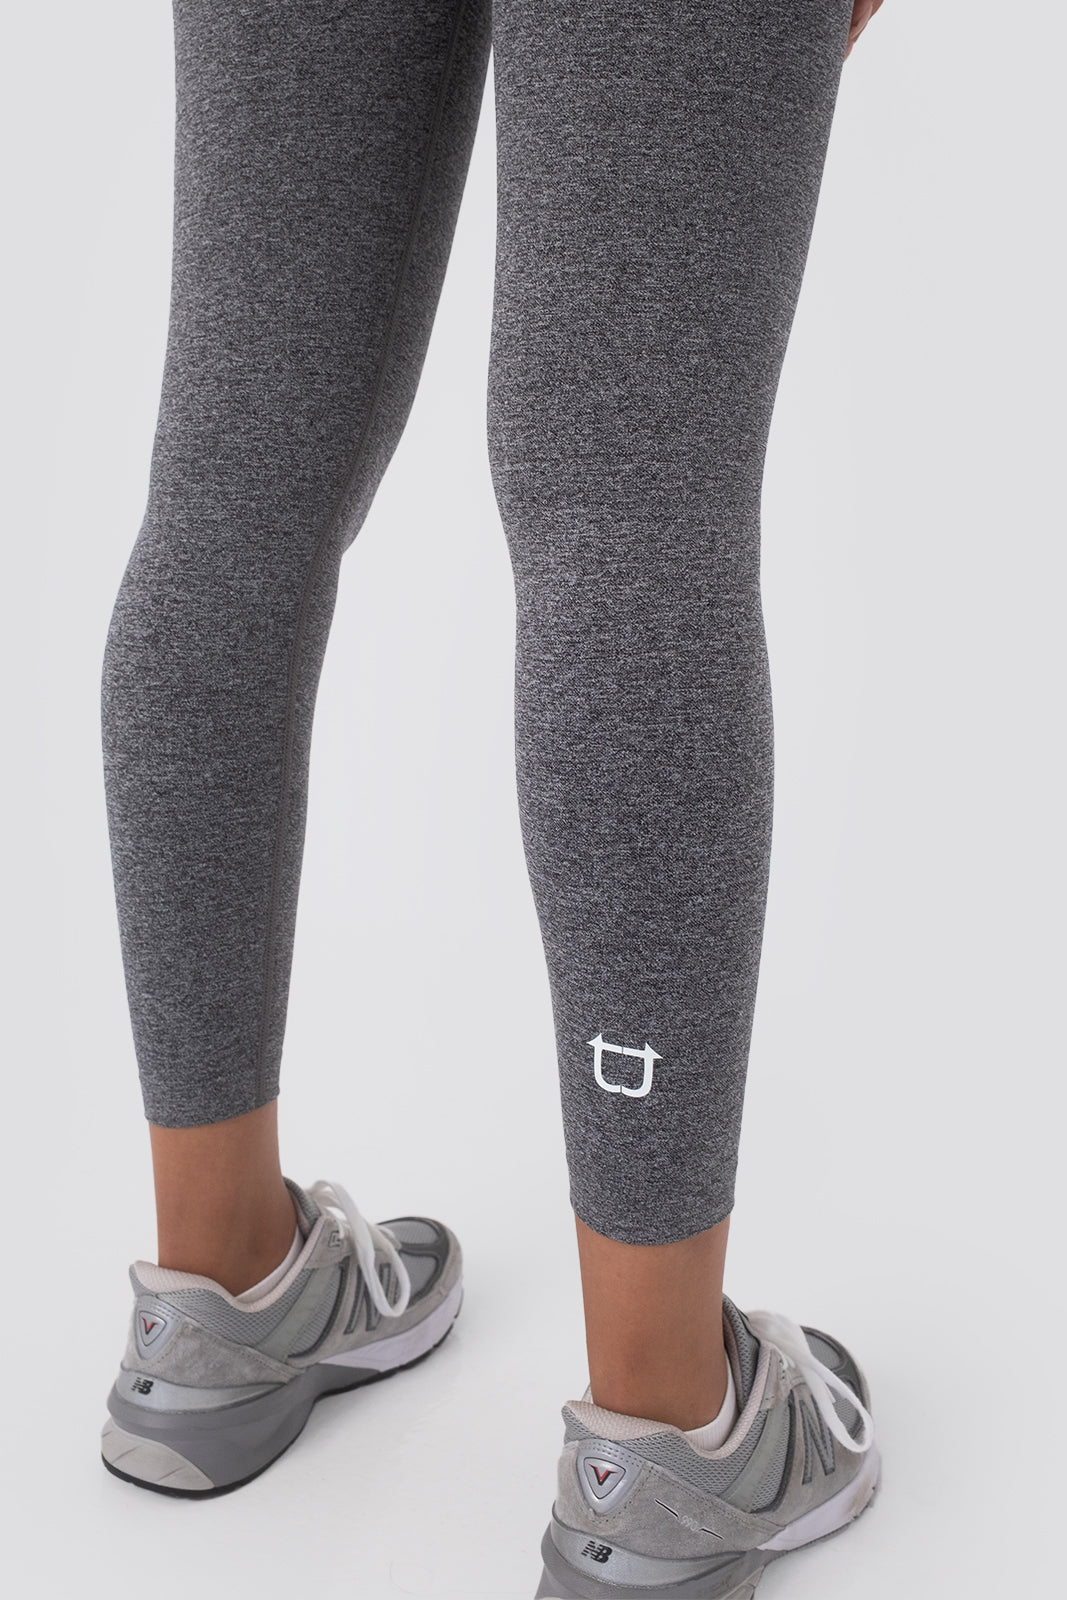 High Waisted Dylan Leggings Charcoal Marle Cotton On, South Africa